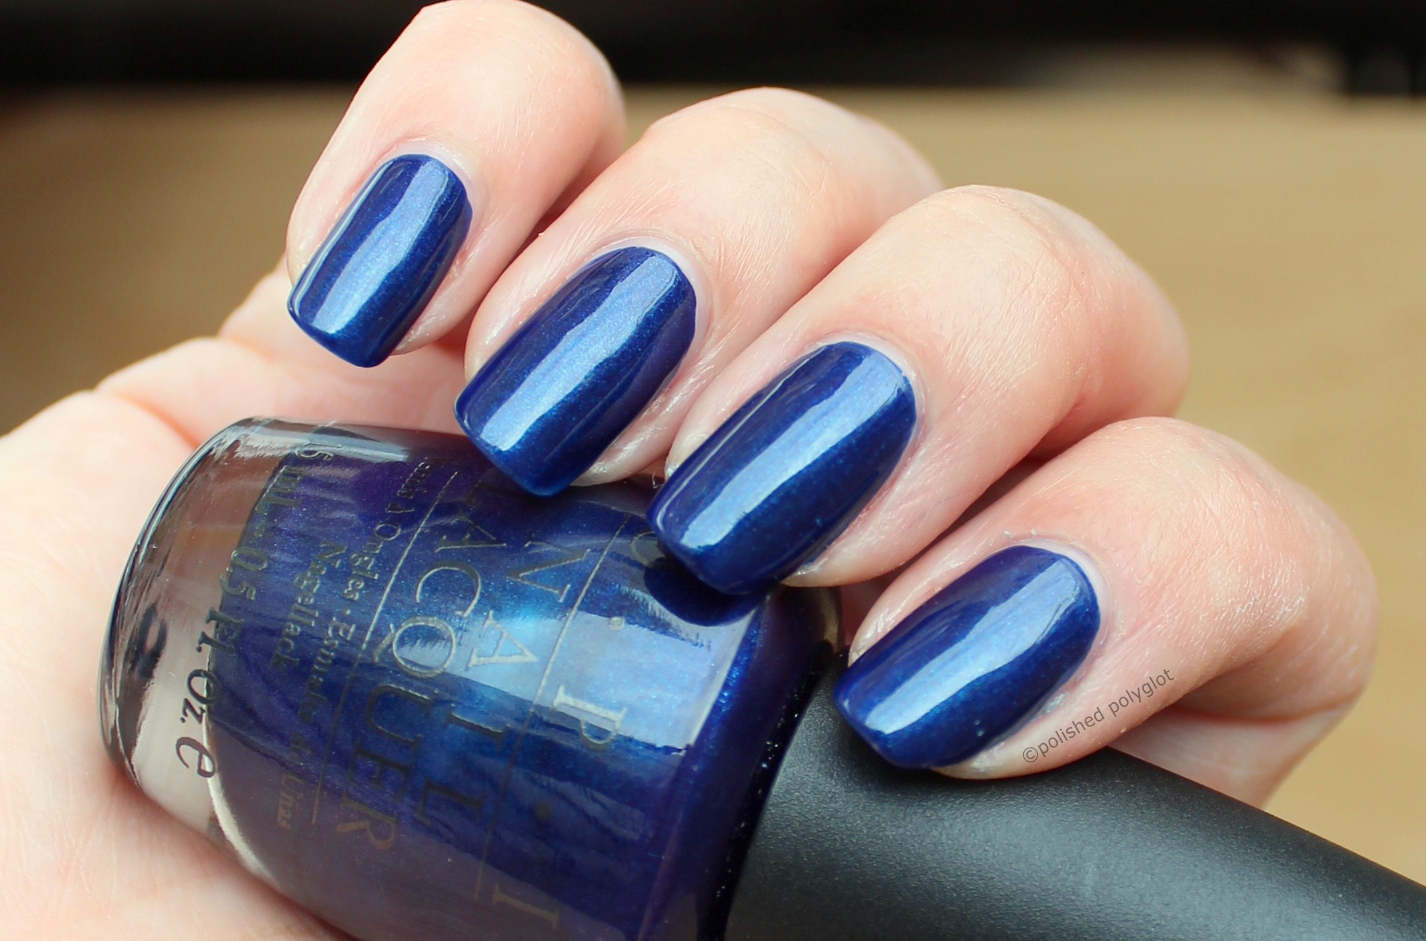 Opi Yoga Ta Get This Blue Swatch - One of my favorite purple polishes ...